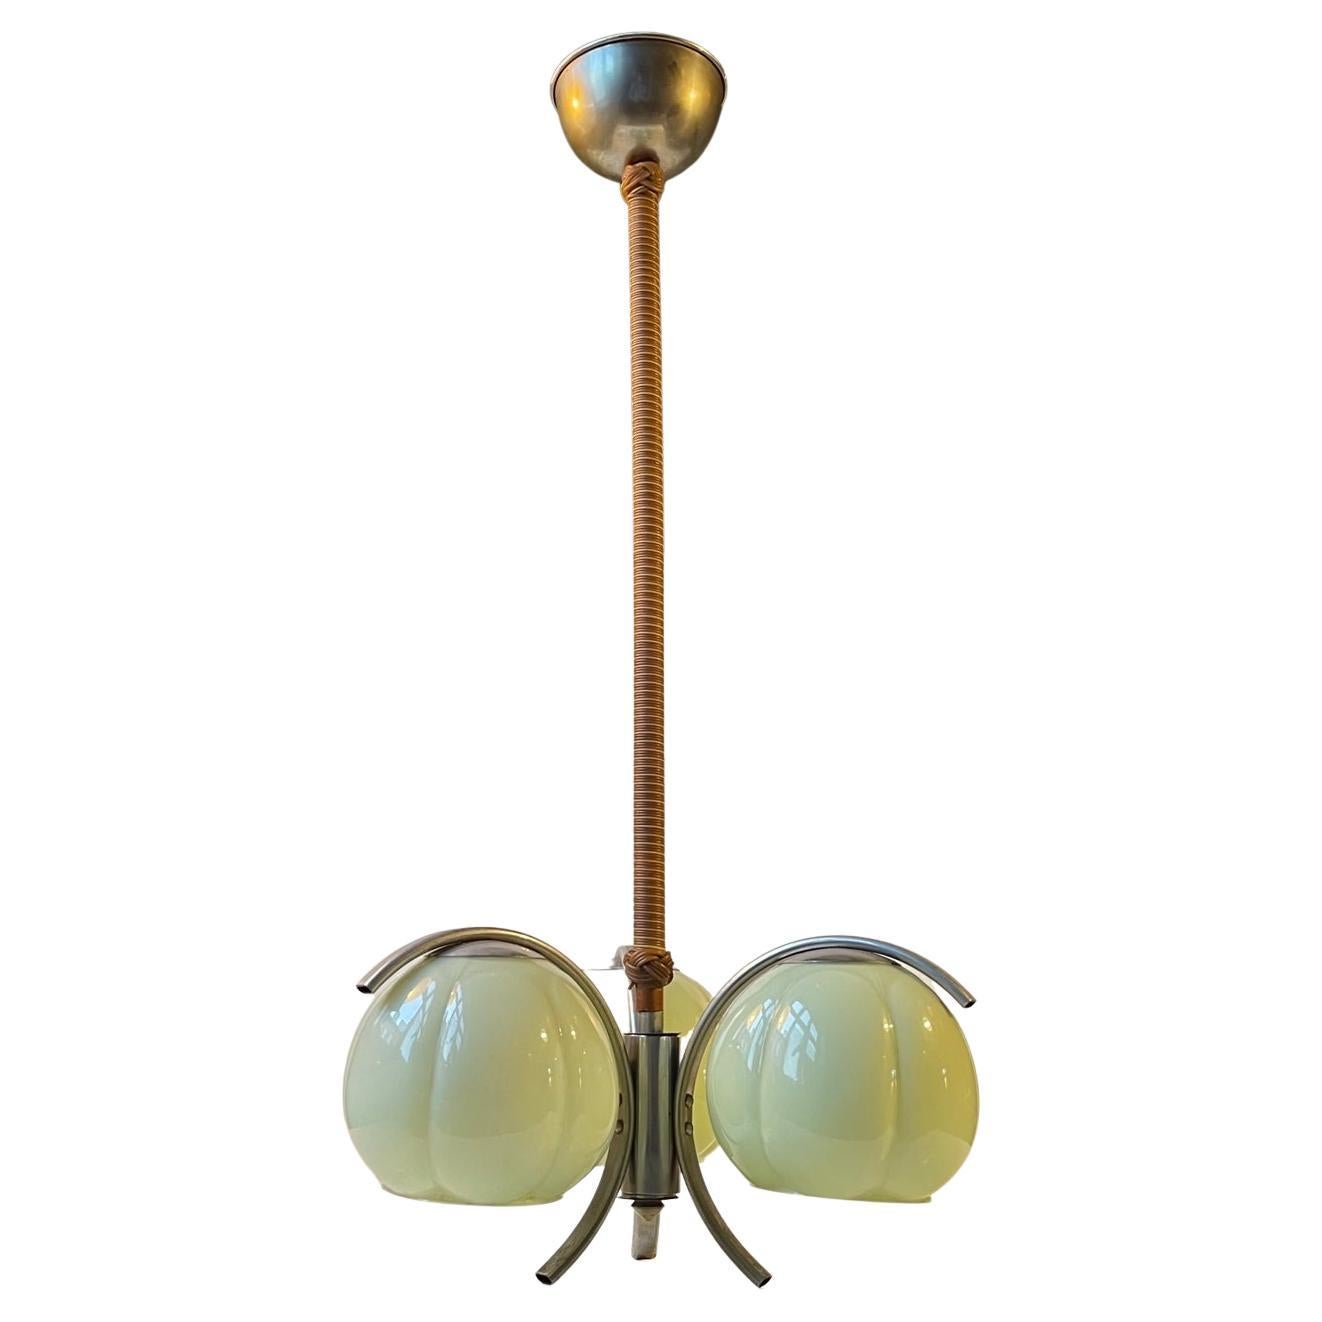 3-Armed Bauhaus Ceiling Light with Light Green Shades, Germany, 1930s